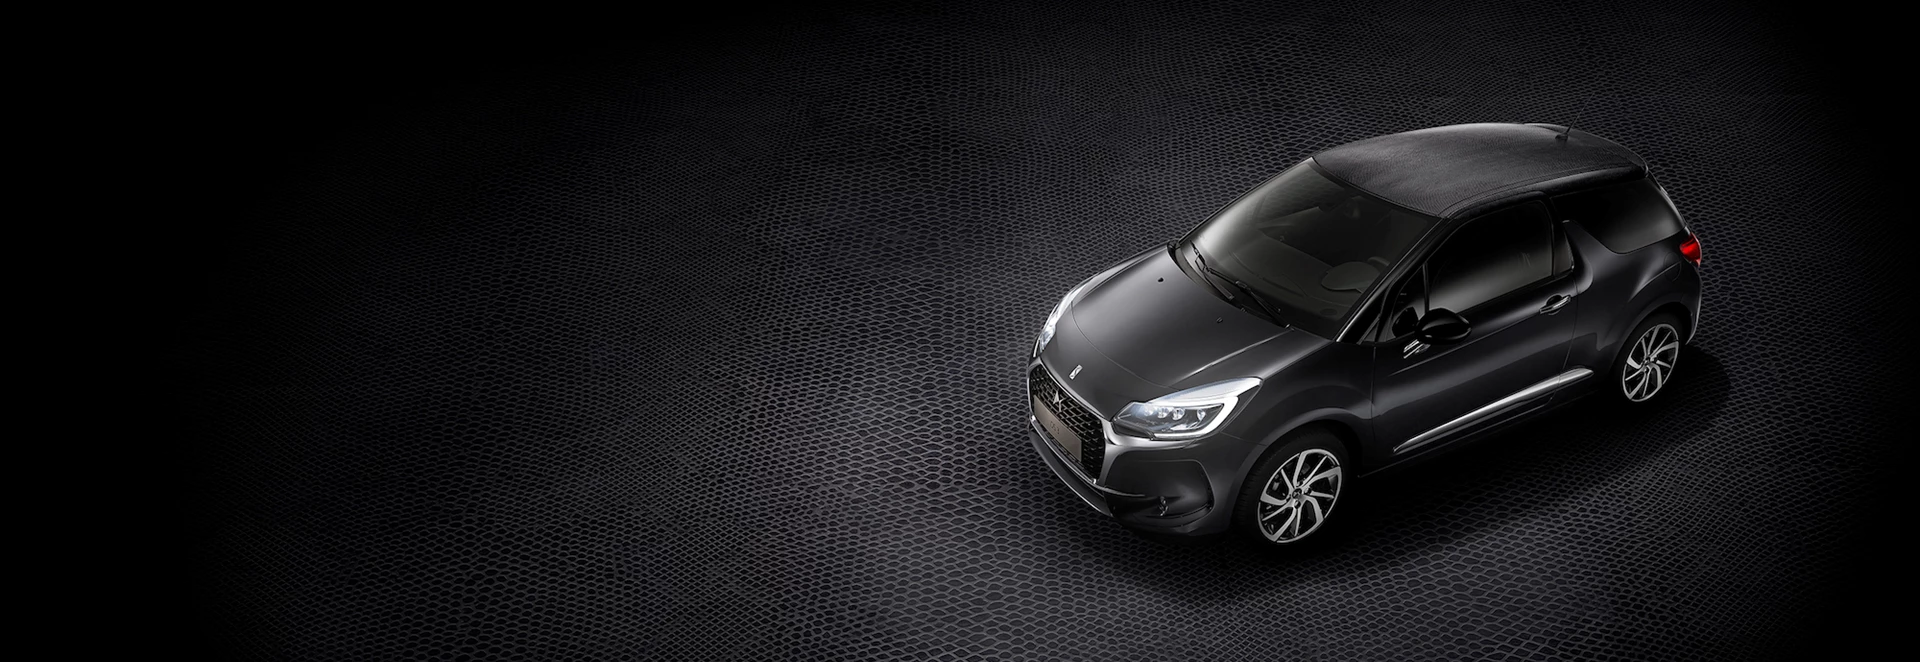 DS unveils limited-edition version of the 3